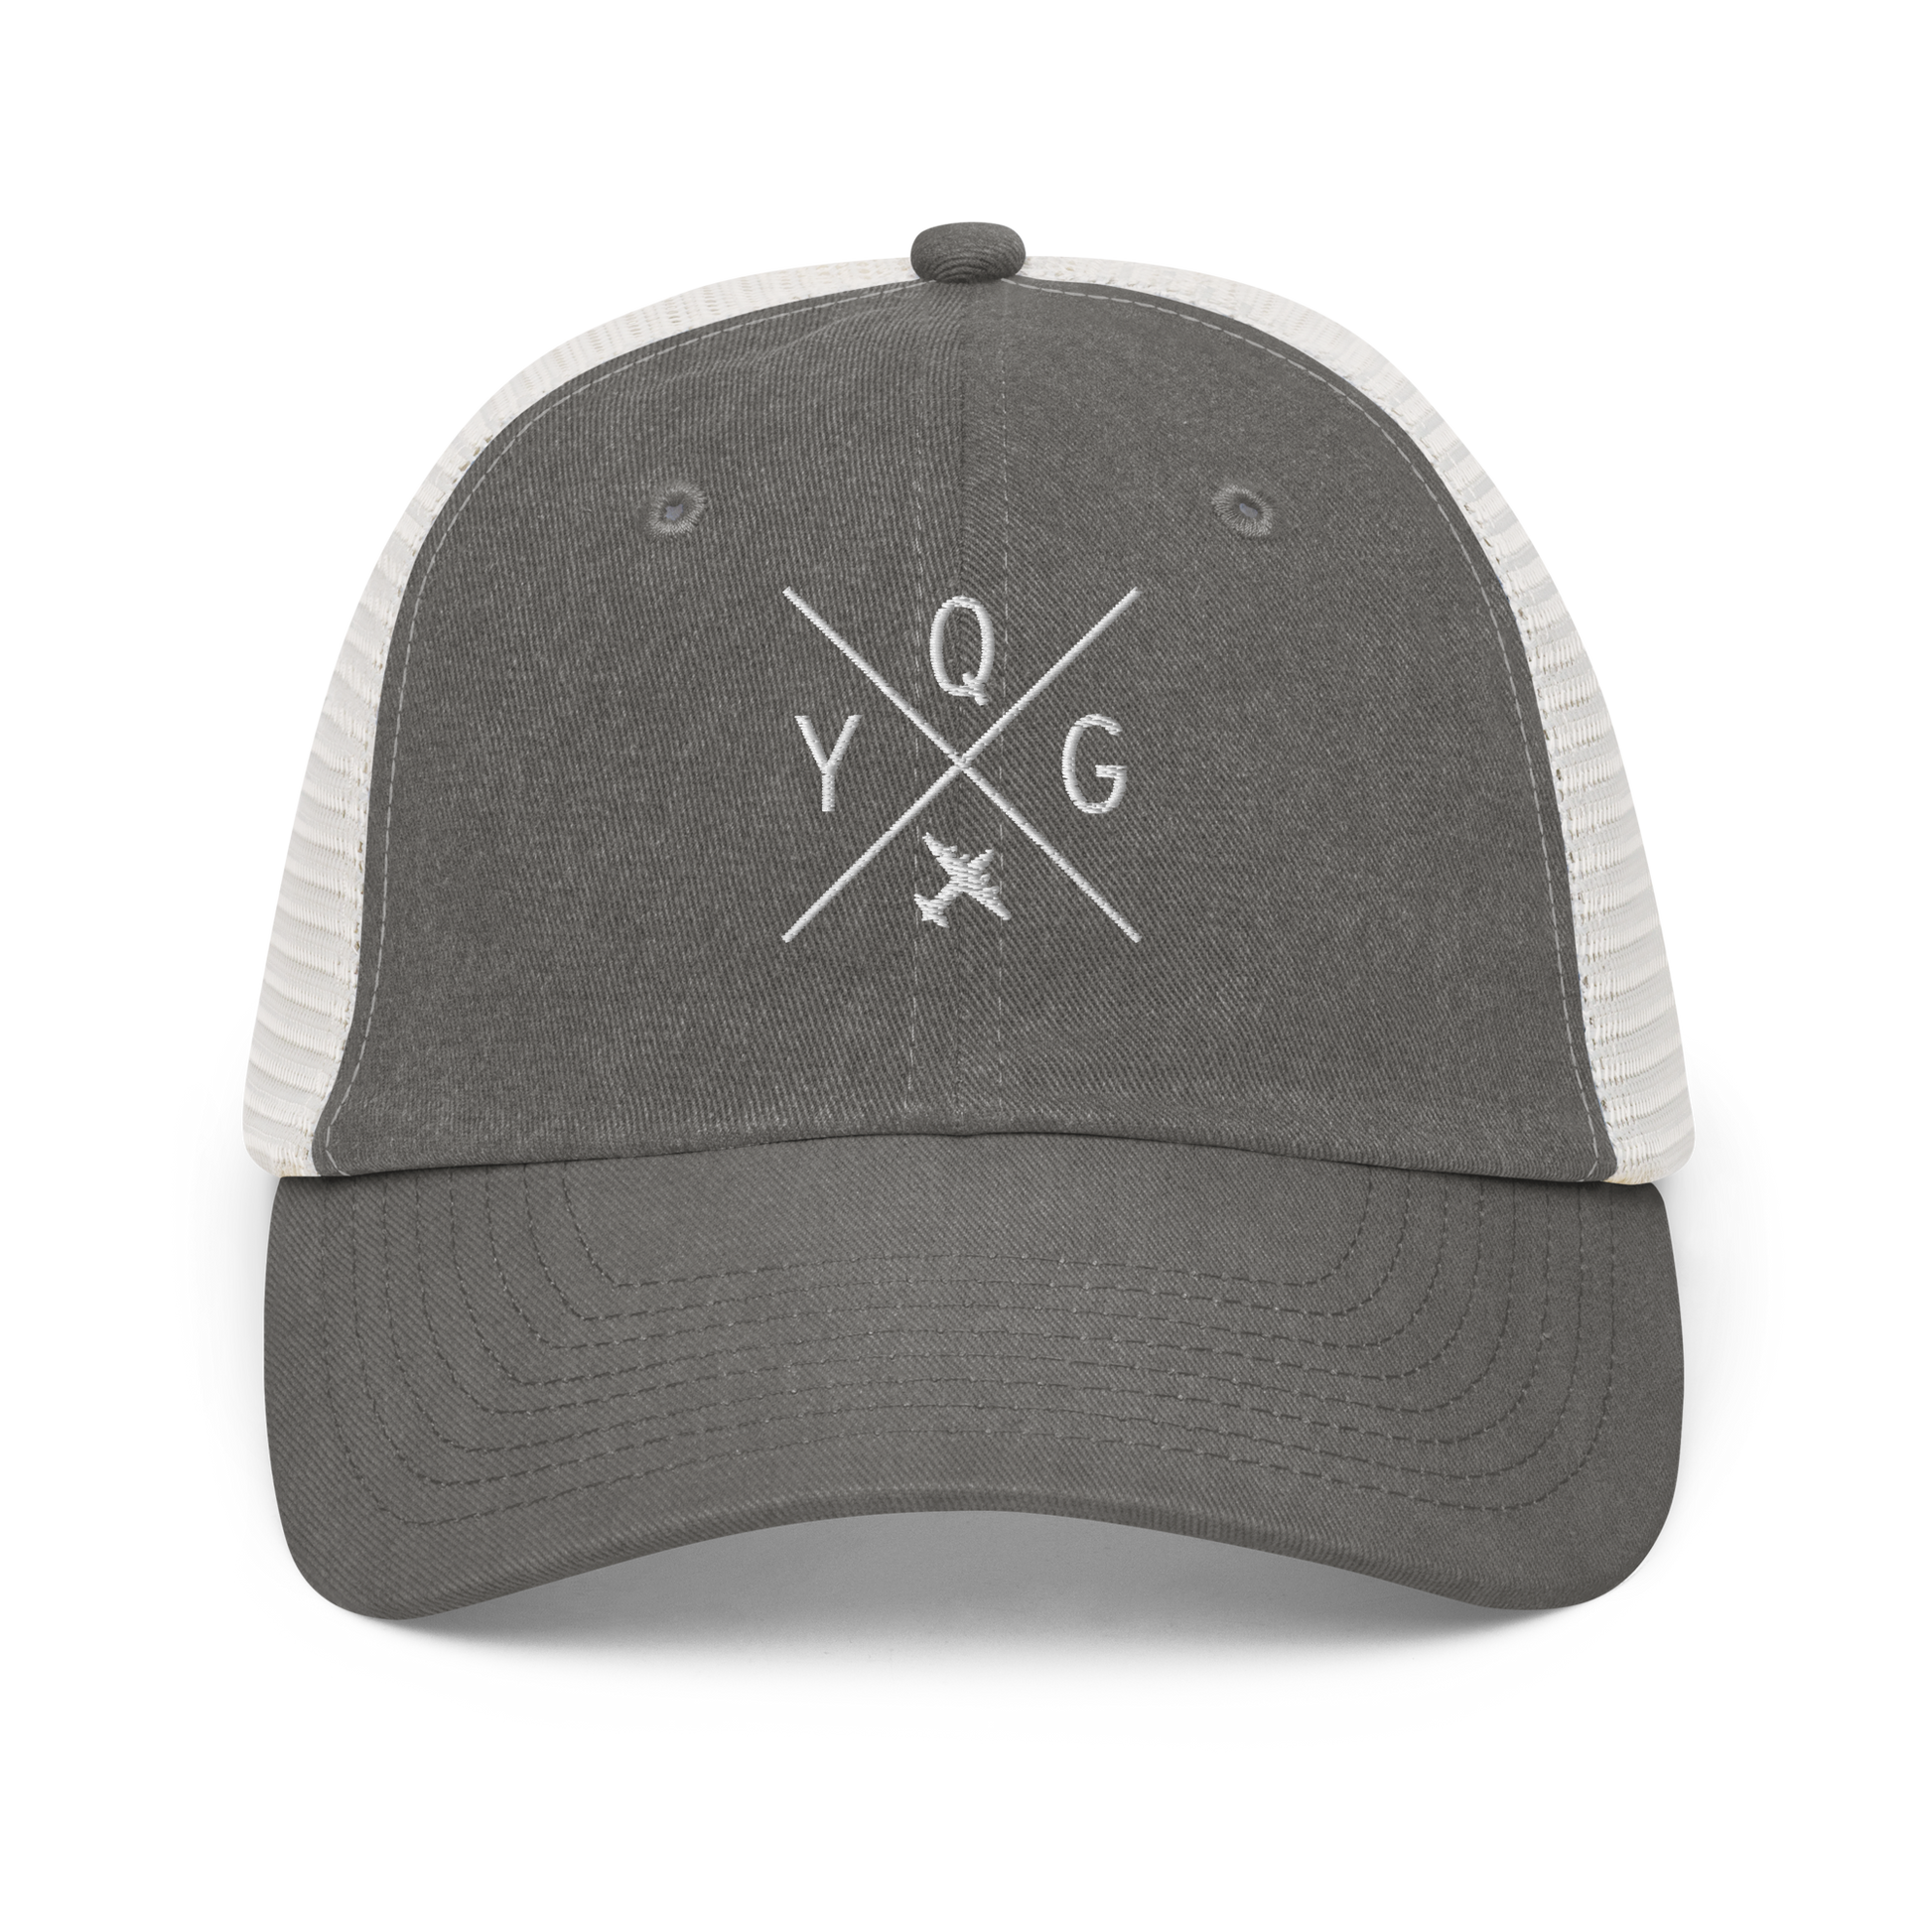 YHM Designs - YQG Windsor Pigment-Dyed Trucker Cap - Crossed-X Design with Airport Code and Vintage Propliner - White Embroidery - Image 09